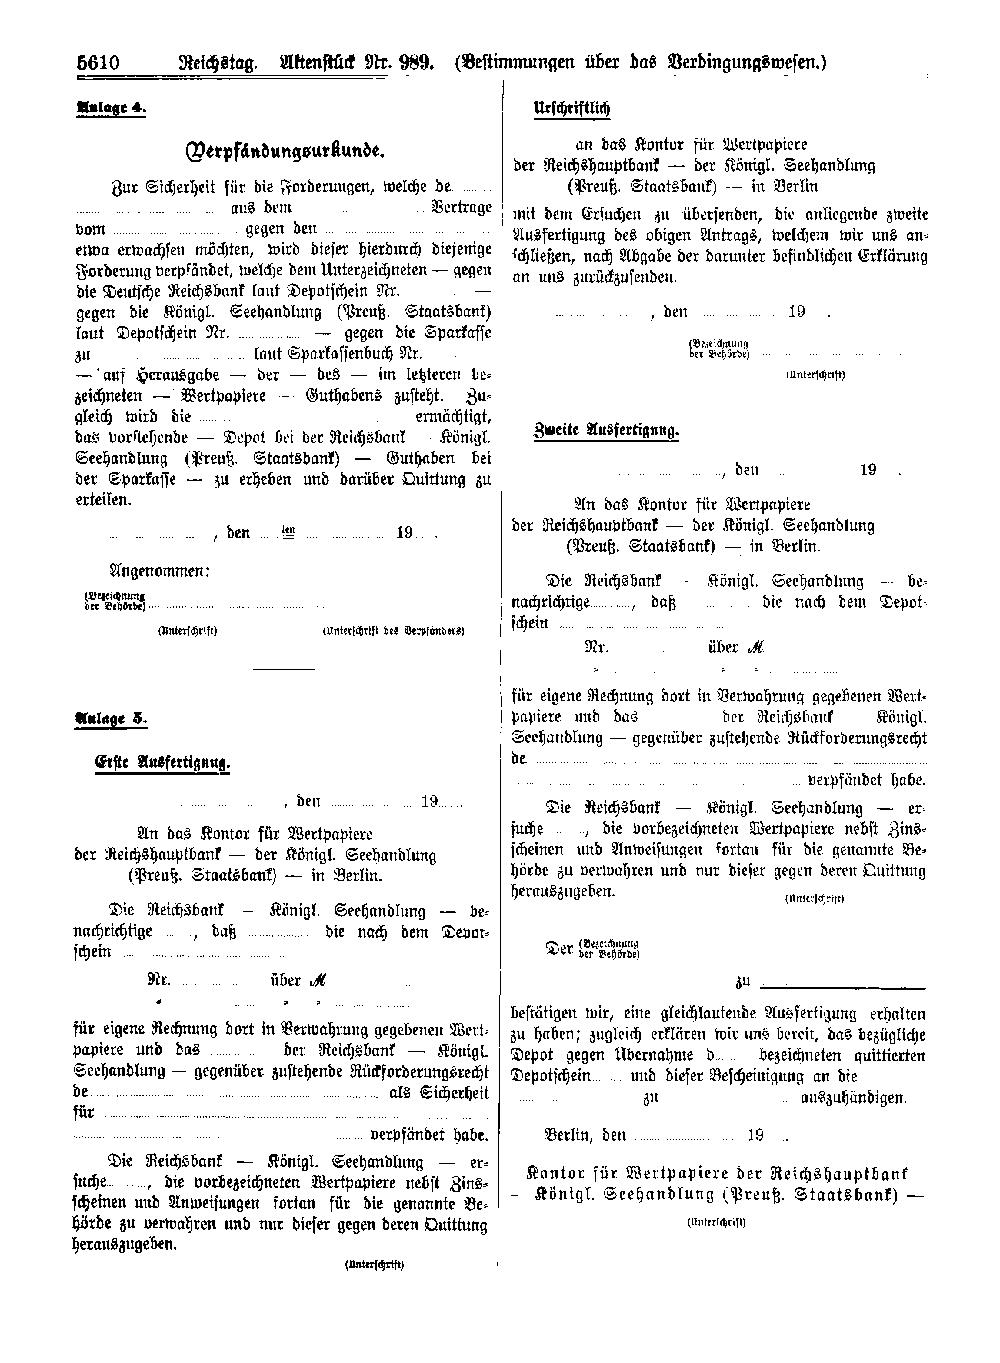 Scan of page 5610